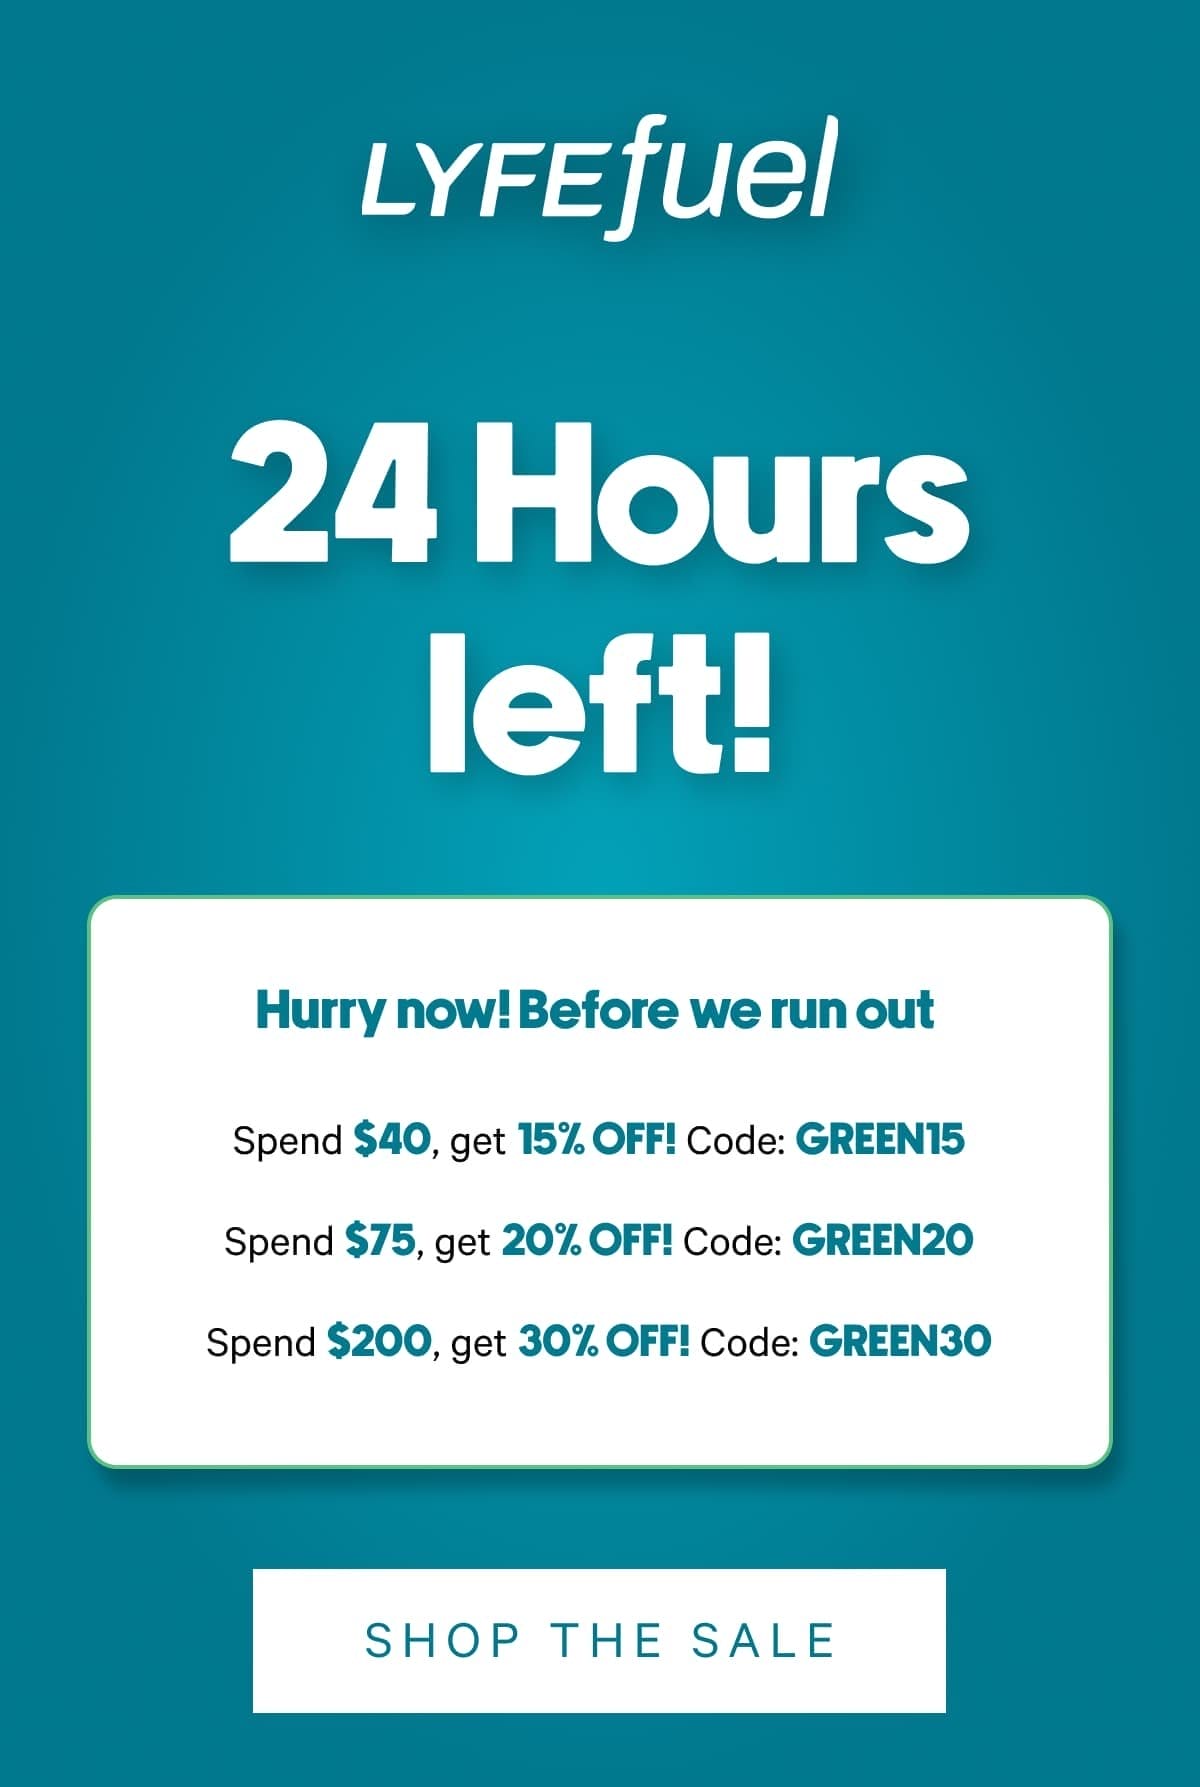 Only 24 hours left!